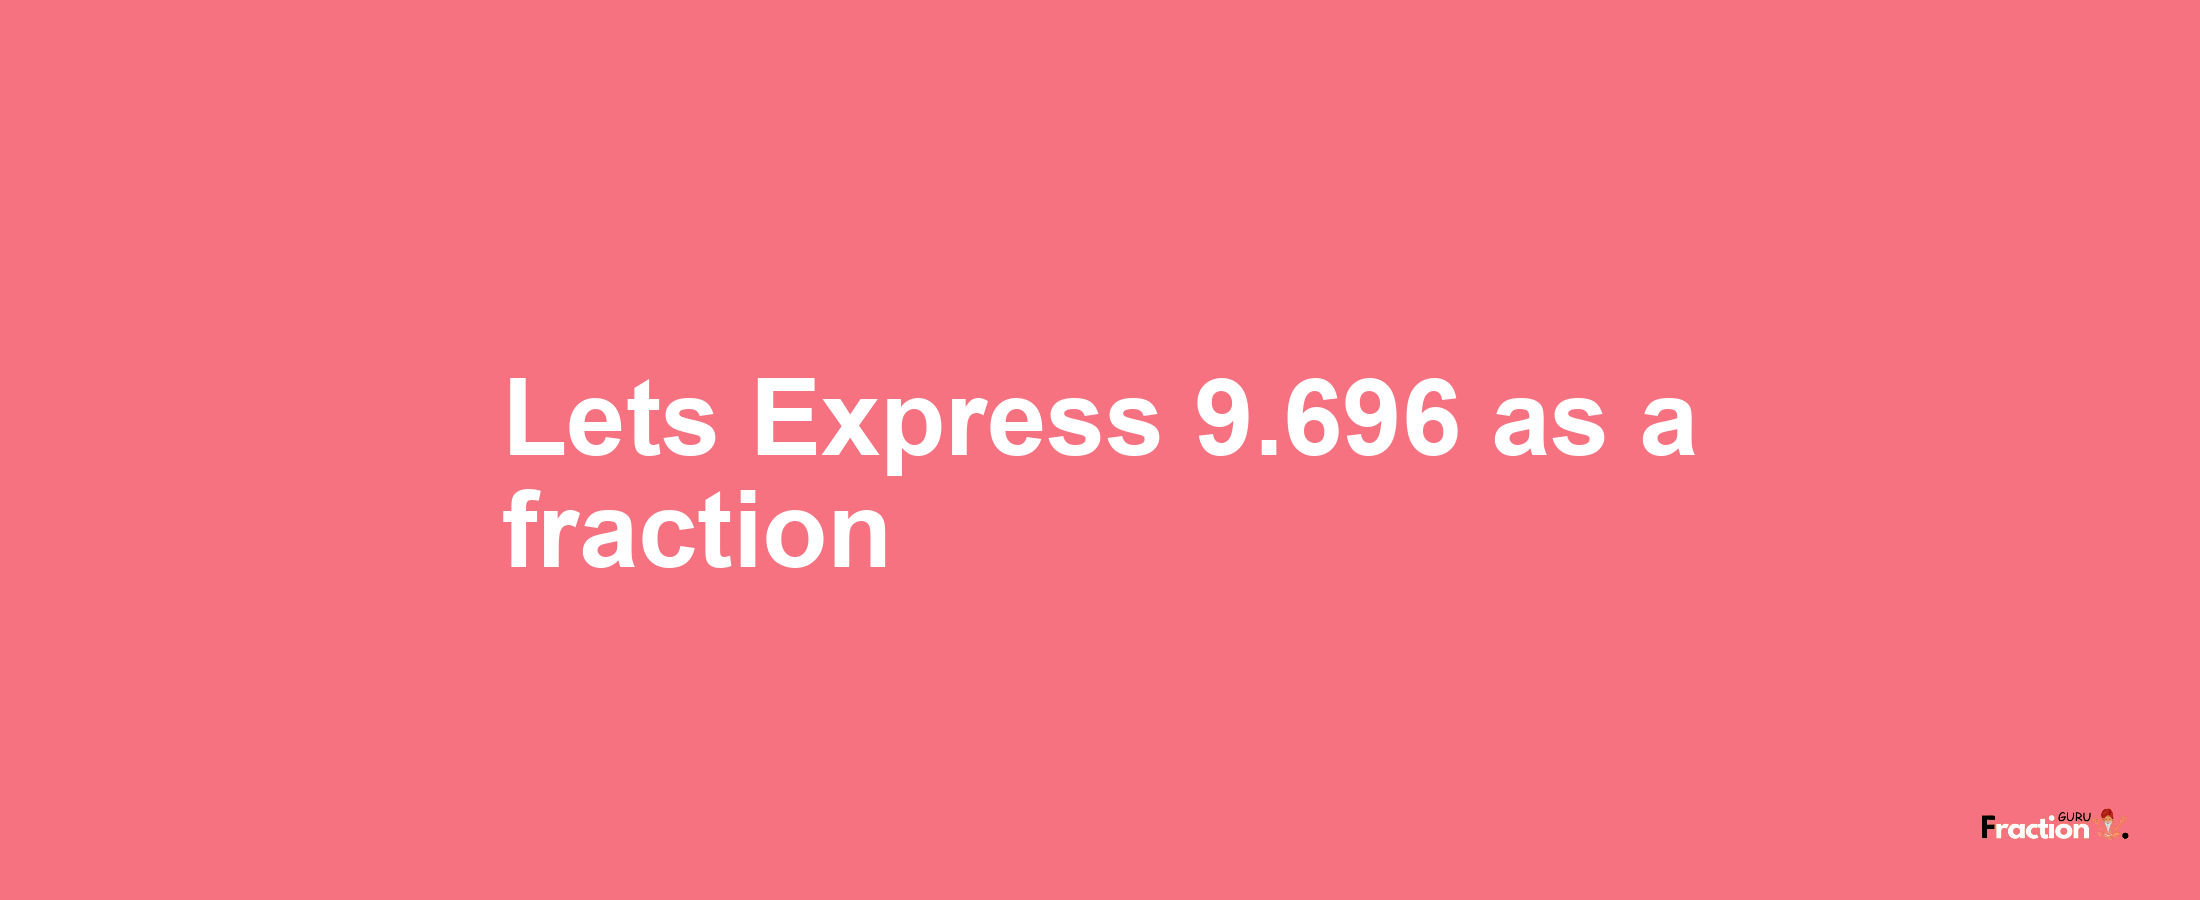 Lets Express 9.696 as afraction